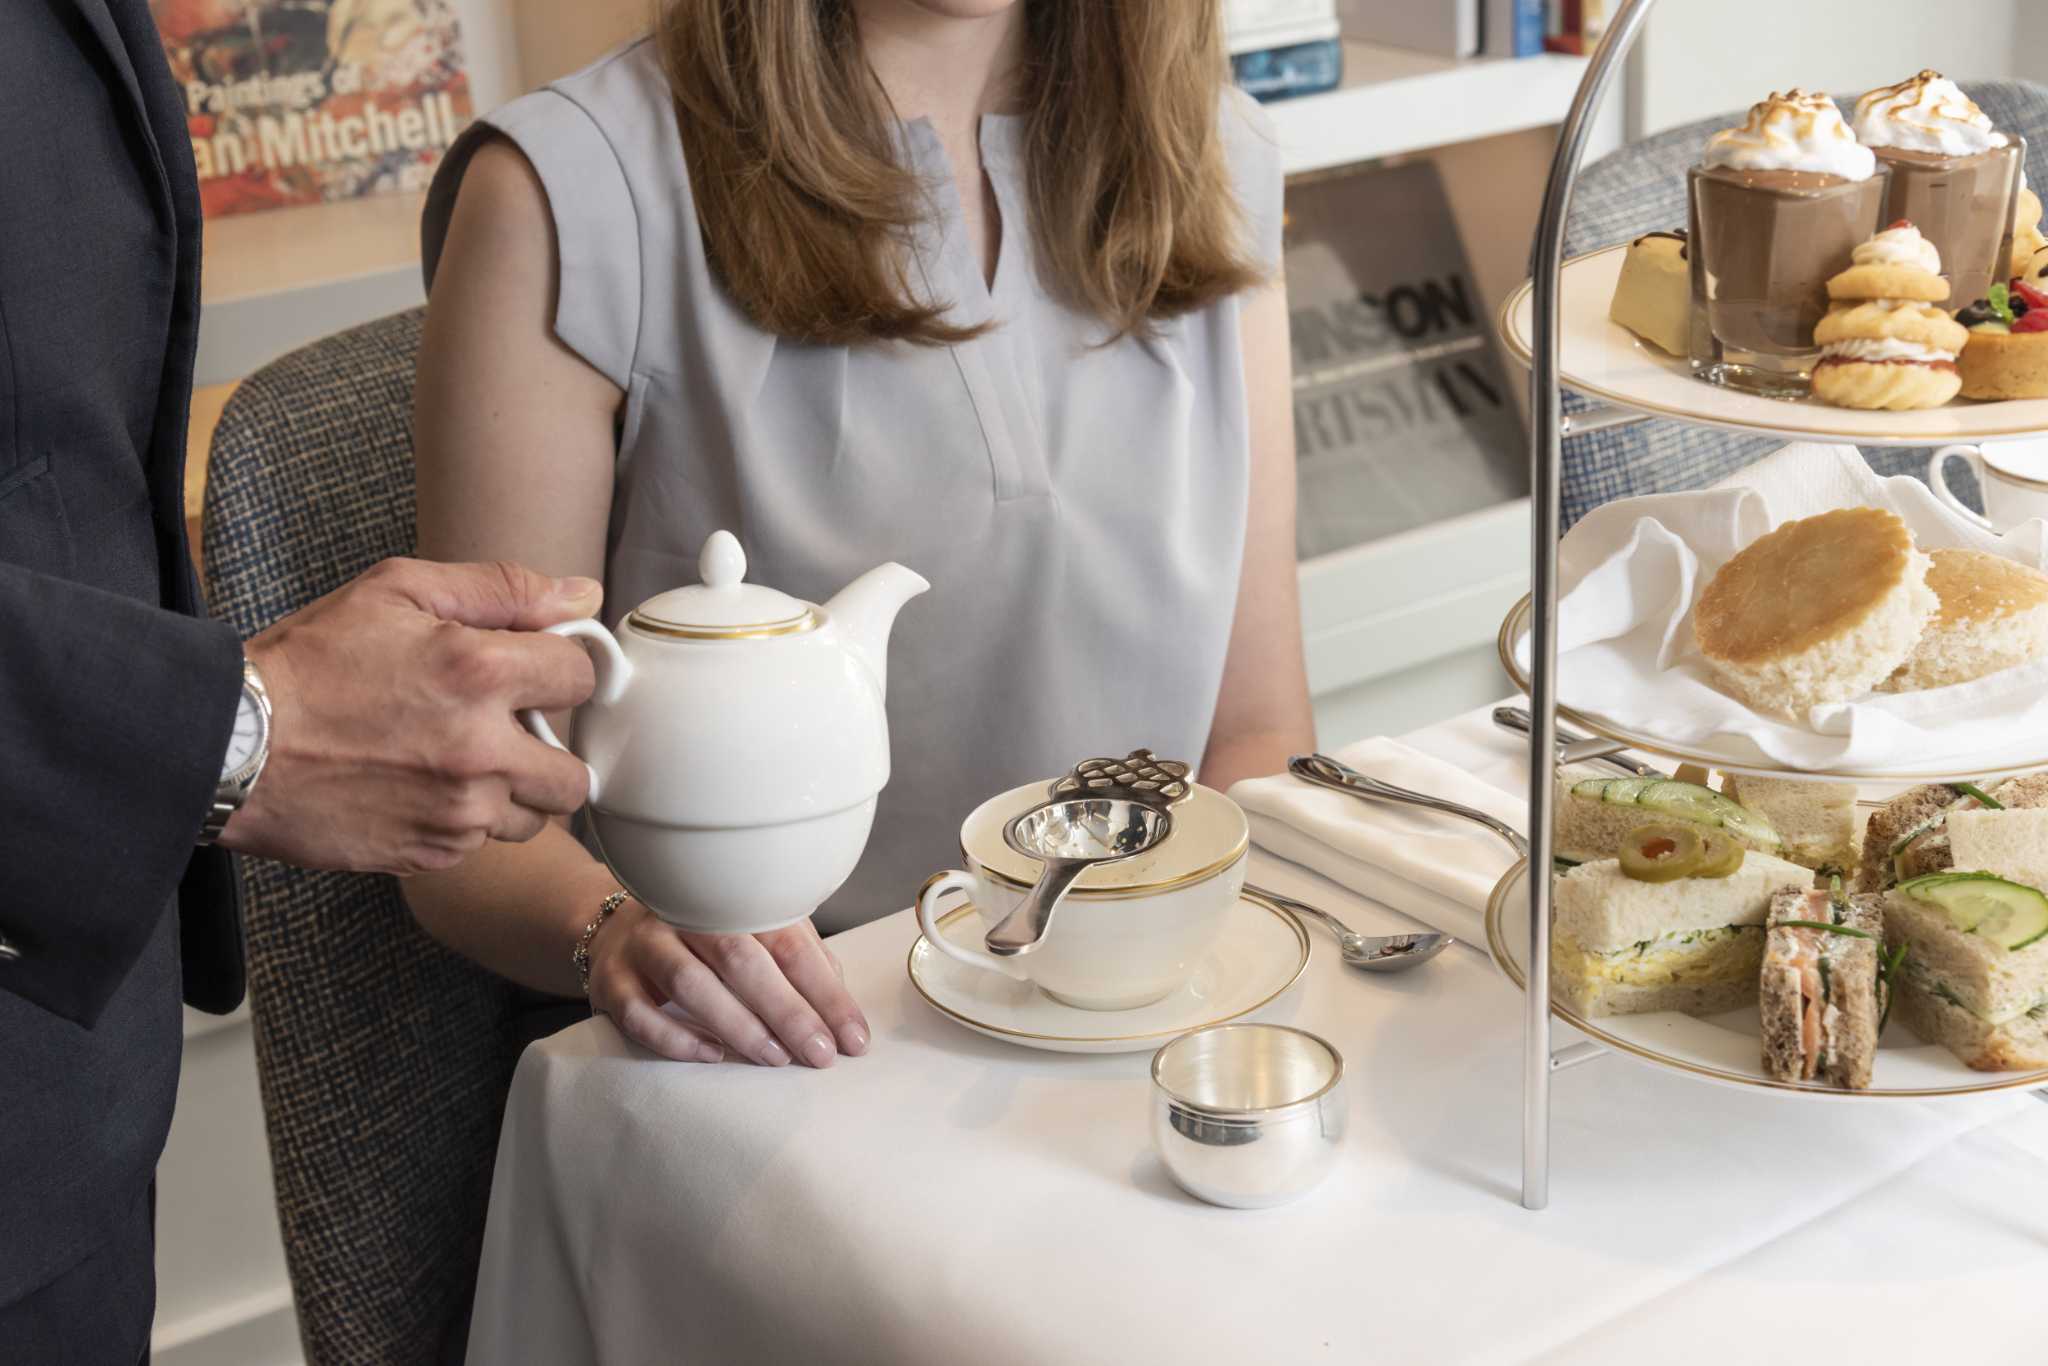 Tea The Hotel launches weekend tea service